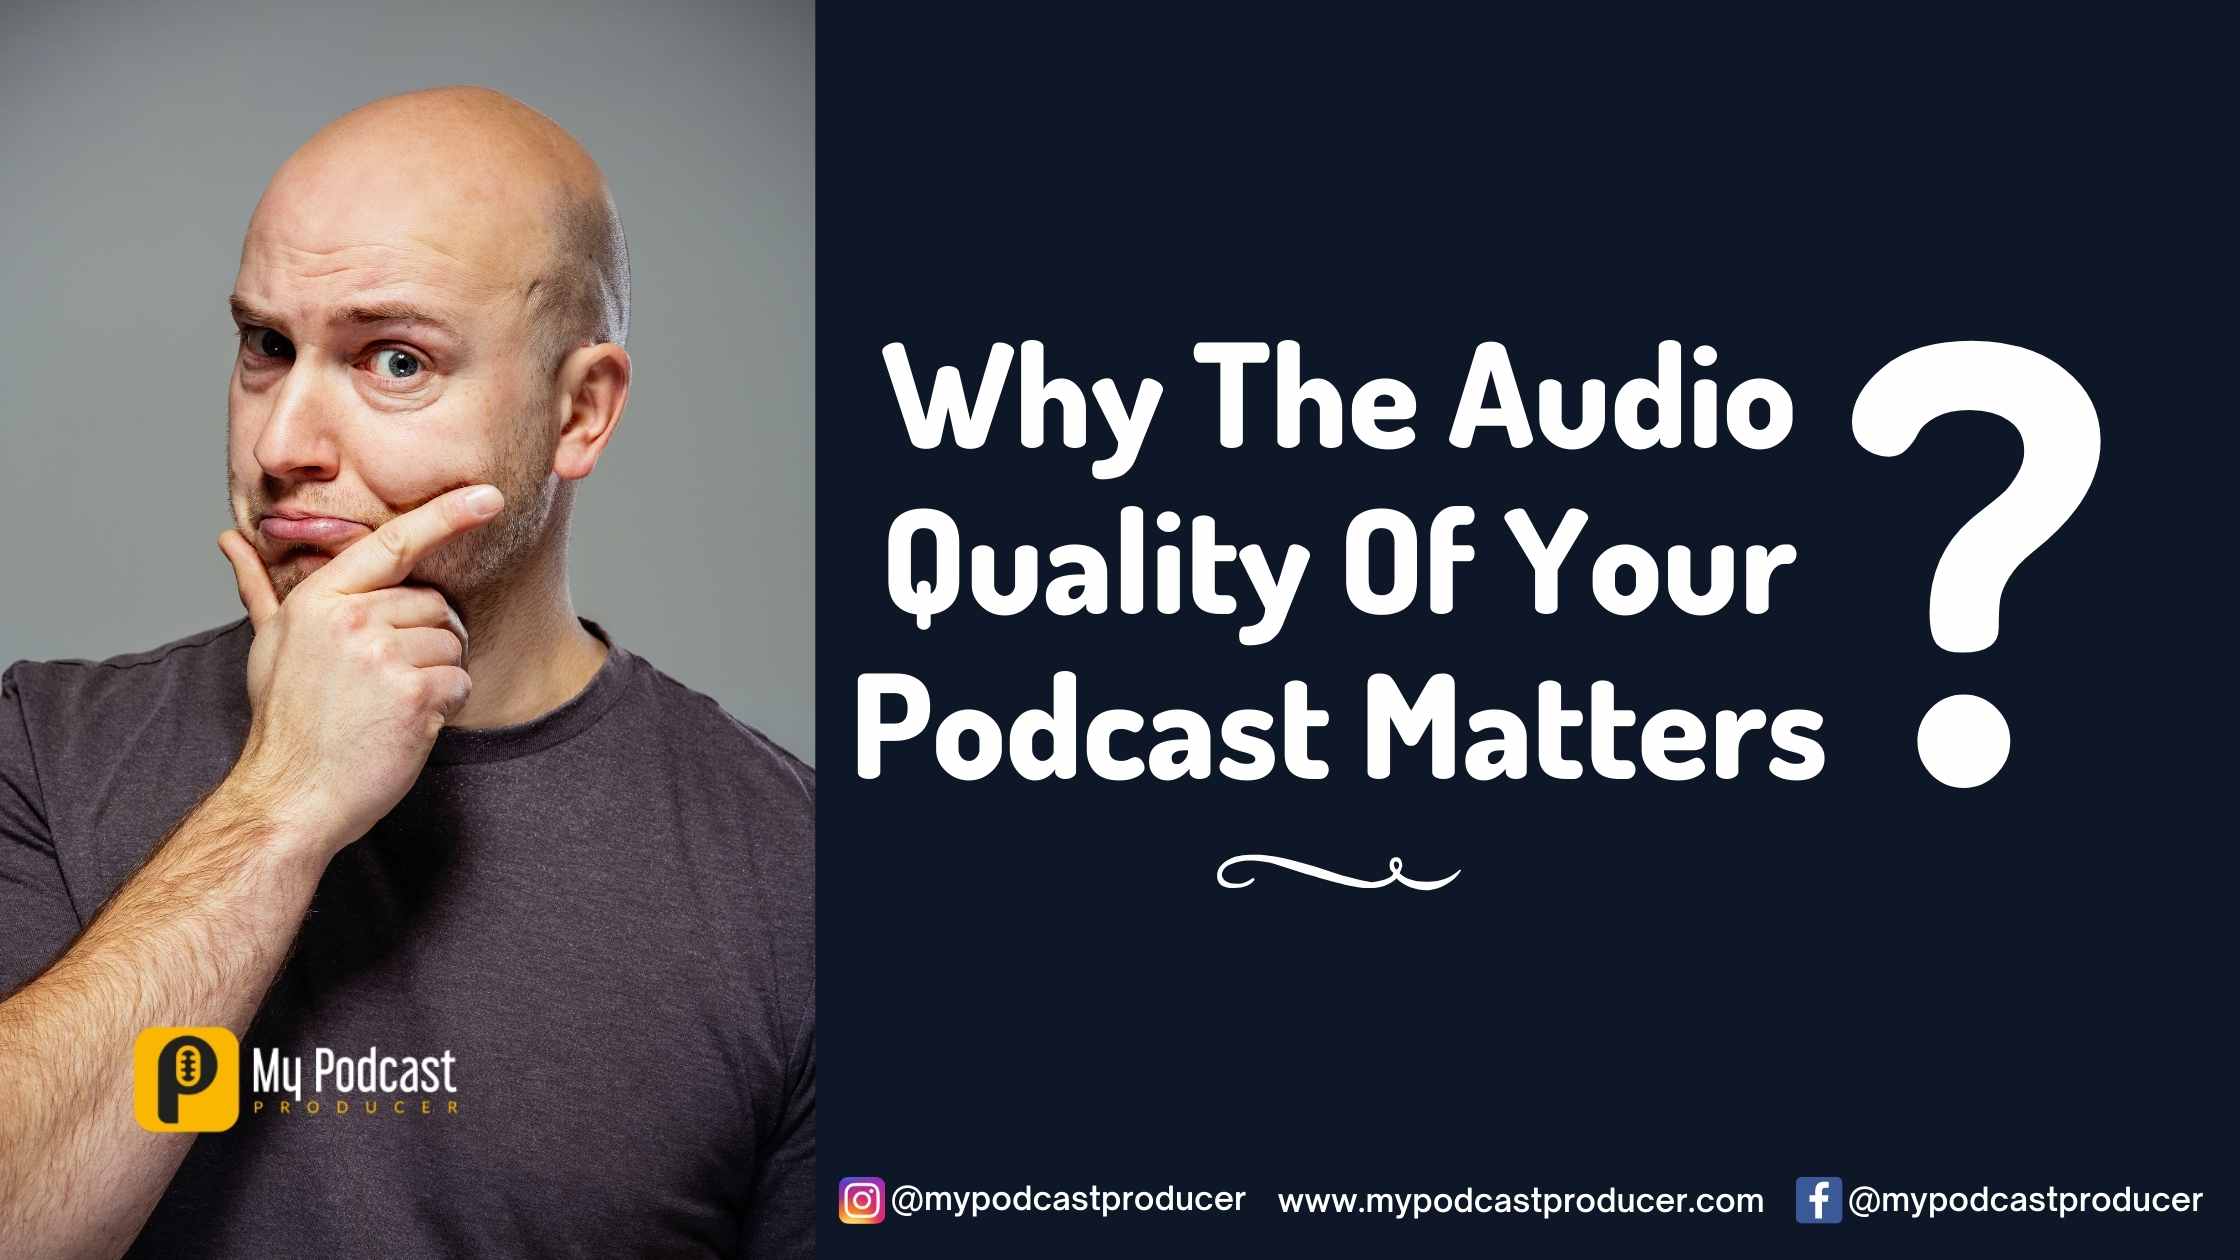 Why the audio quality of your podcast matters - MYPODCASTPRODUCER.COM